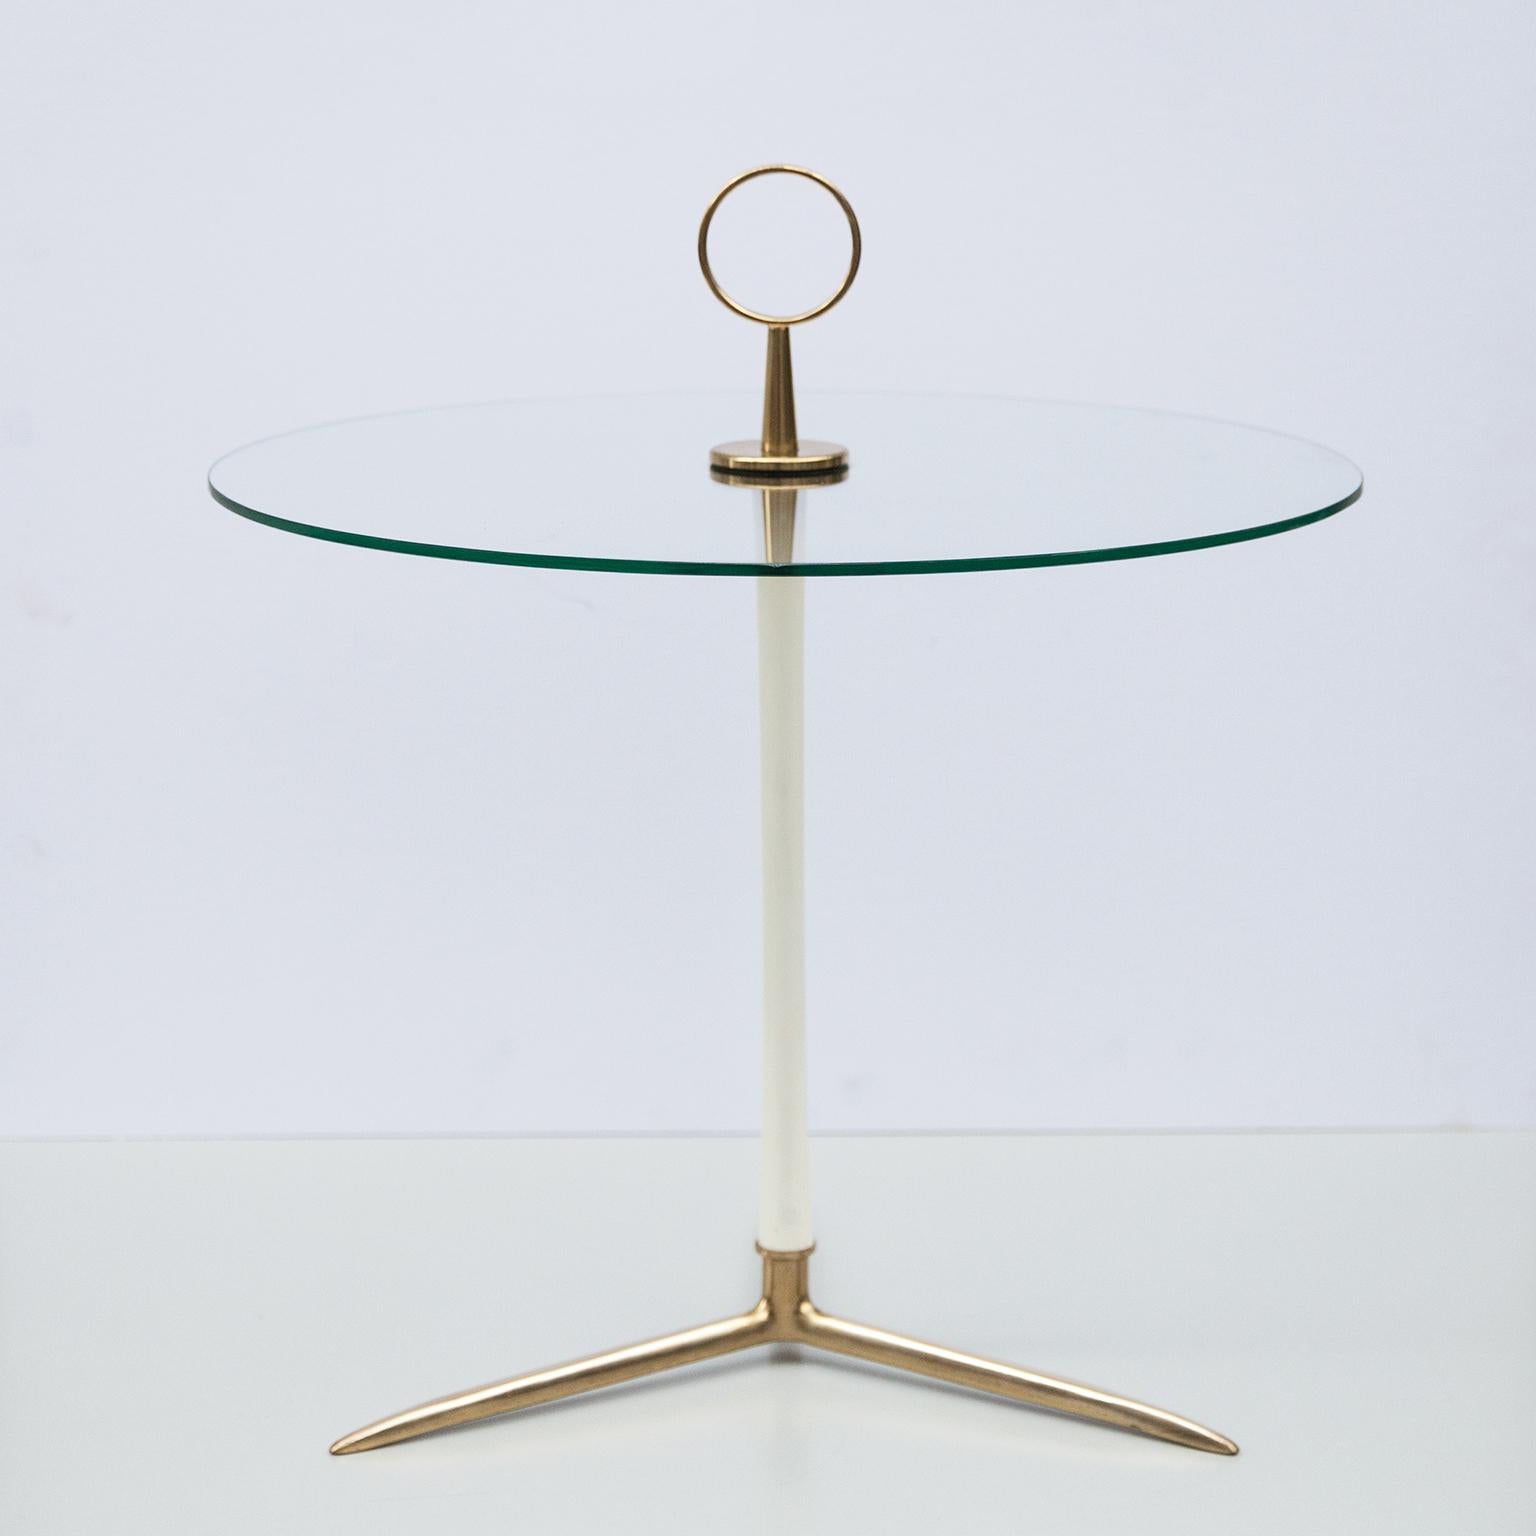 Sophisticated side and serving table designed by Cesare Lacca, Italy 1950. Manufactured in a brass tripod base with a white bar and a round brass handle to move it easily for serving drinks.

The original round glass top is in very good condition